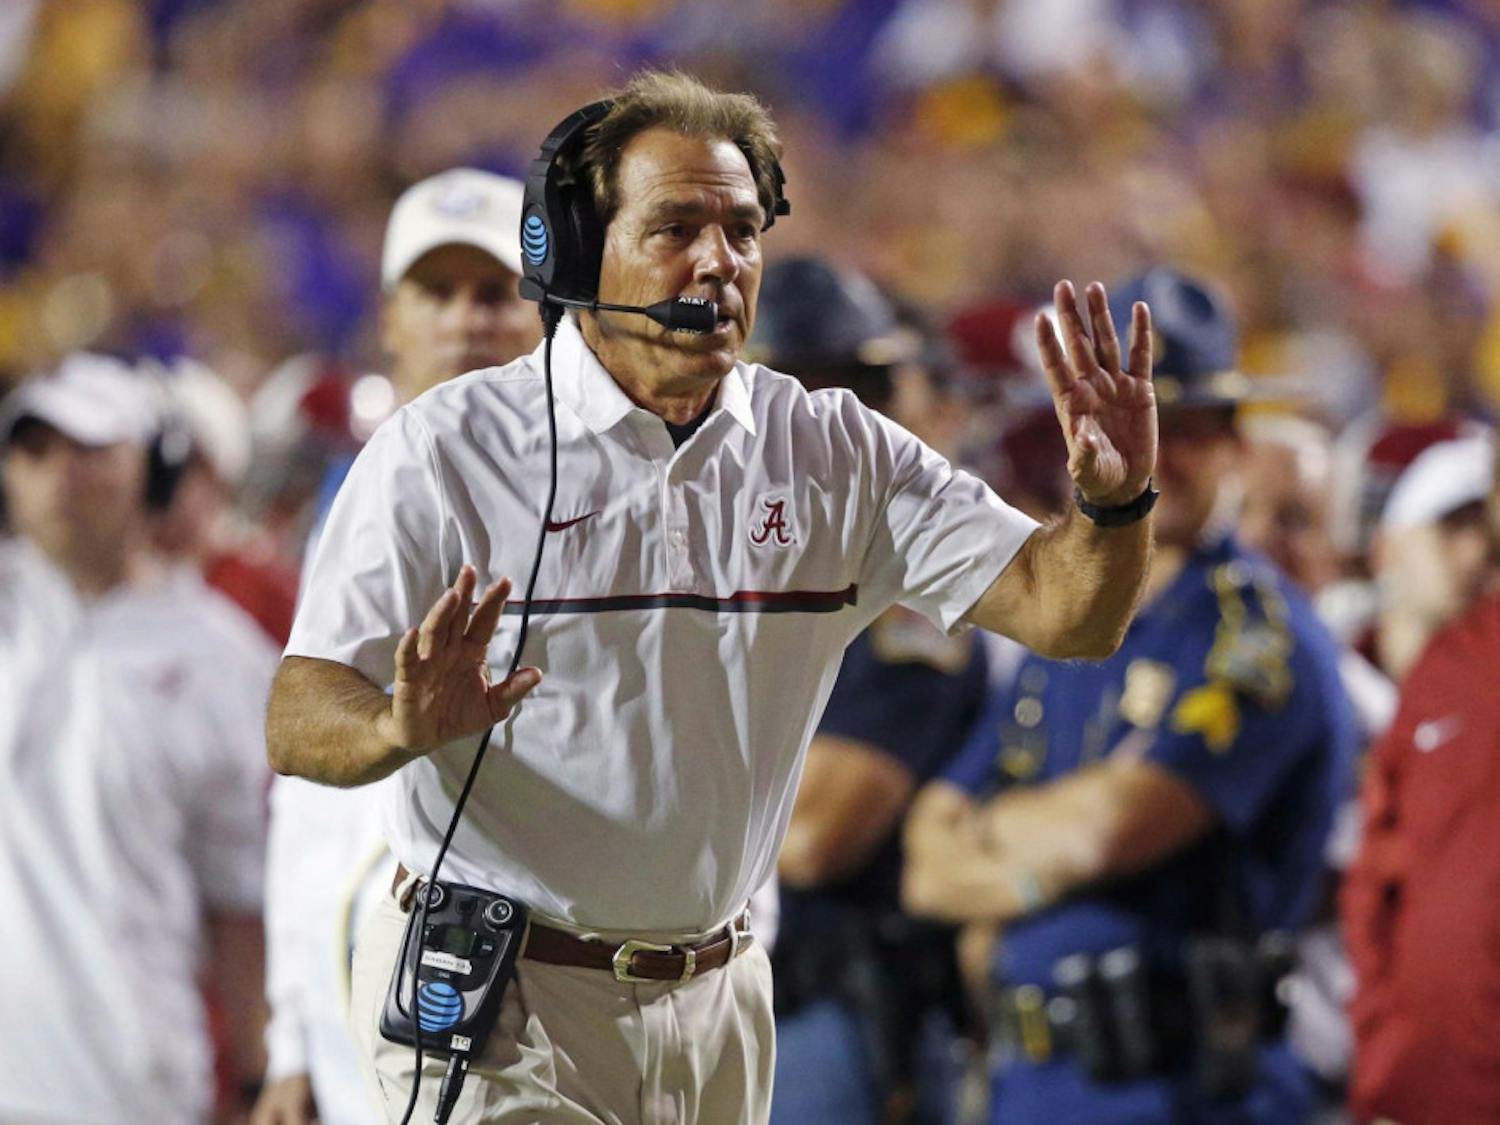 Alabama head coach Nick Saban tries to get the referee's attention as the play clock approaches zero in the second half of an NCAA college football game against LSU in Baton Rouge, La., Saturday, Nov. 5, 2016. Alabama won 10-0. (AP Photo/Gerald Herbert)